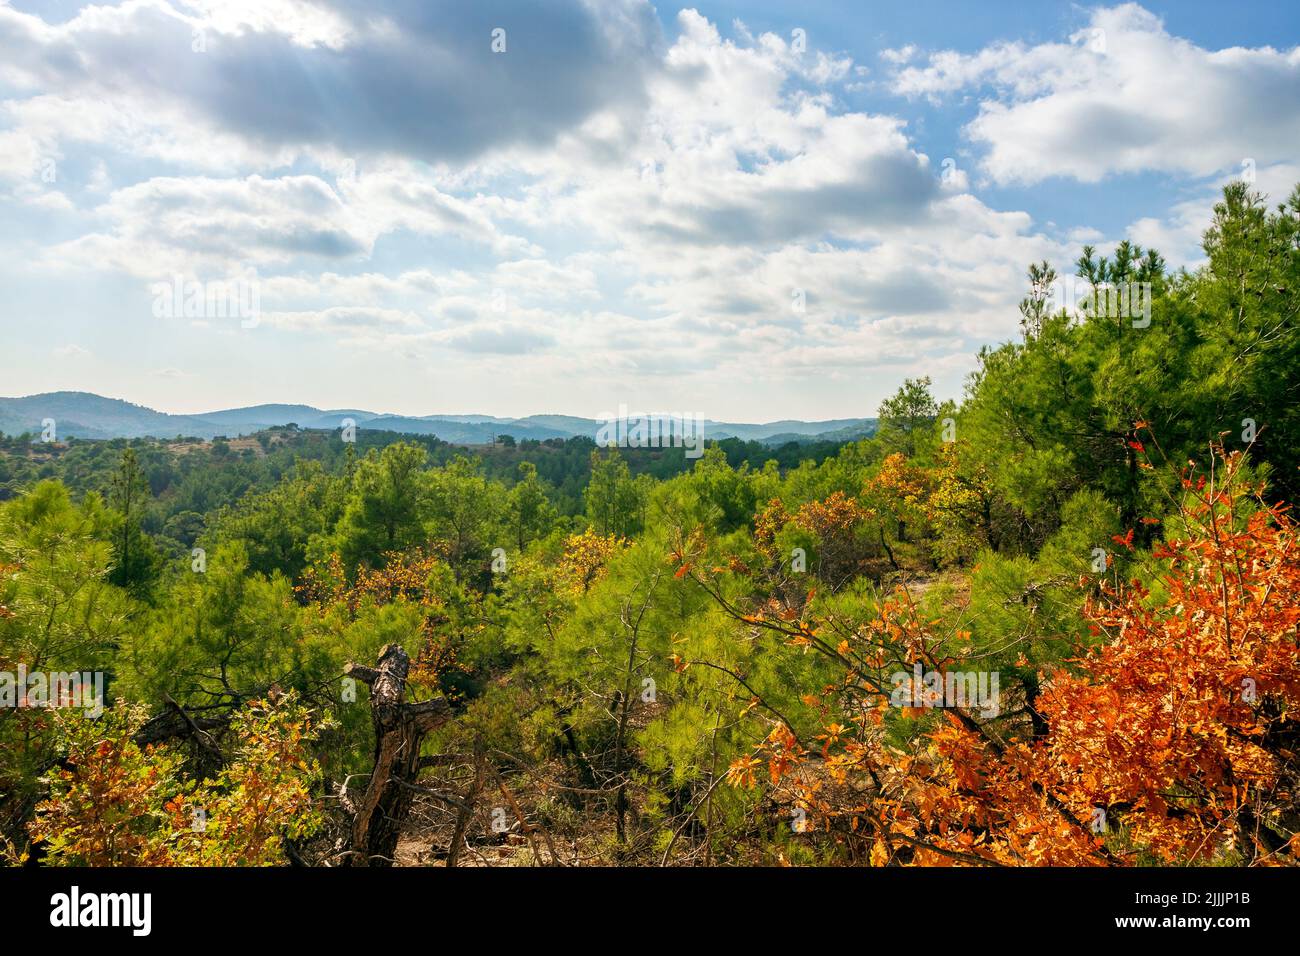 The Dadia-Lefkimi-Soufli Forest National Park, a major natural reserve in Thrace region, northern Greece, an immensly important sanctuary of wildlife. Stock Photo